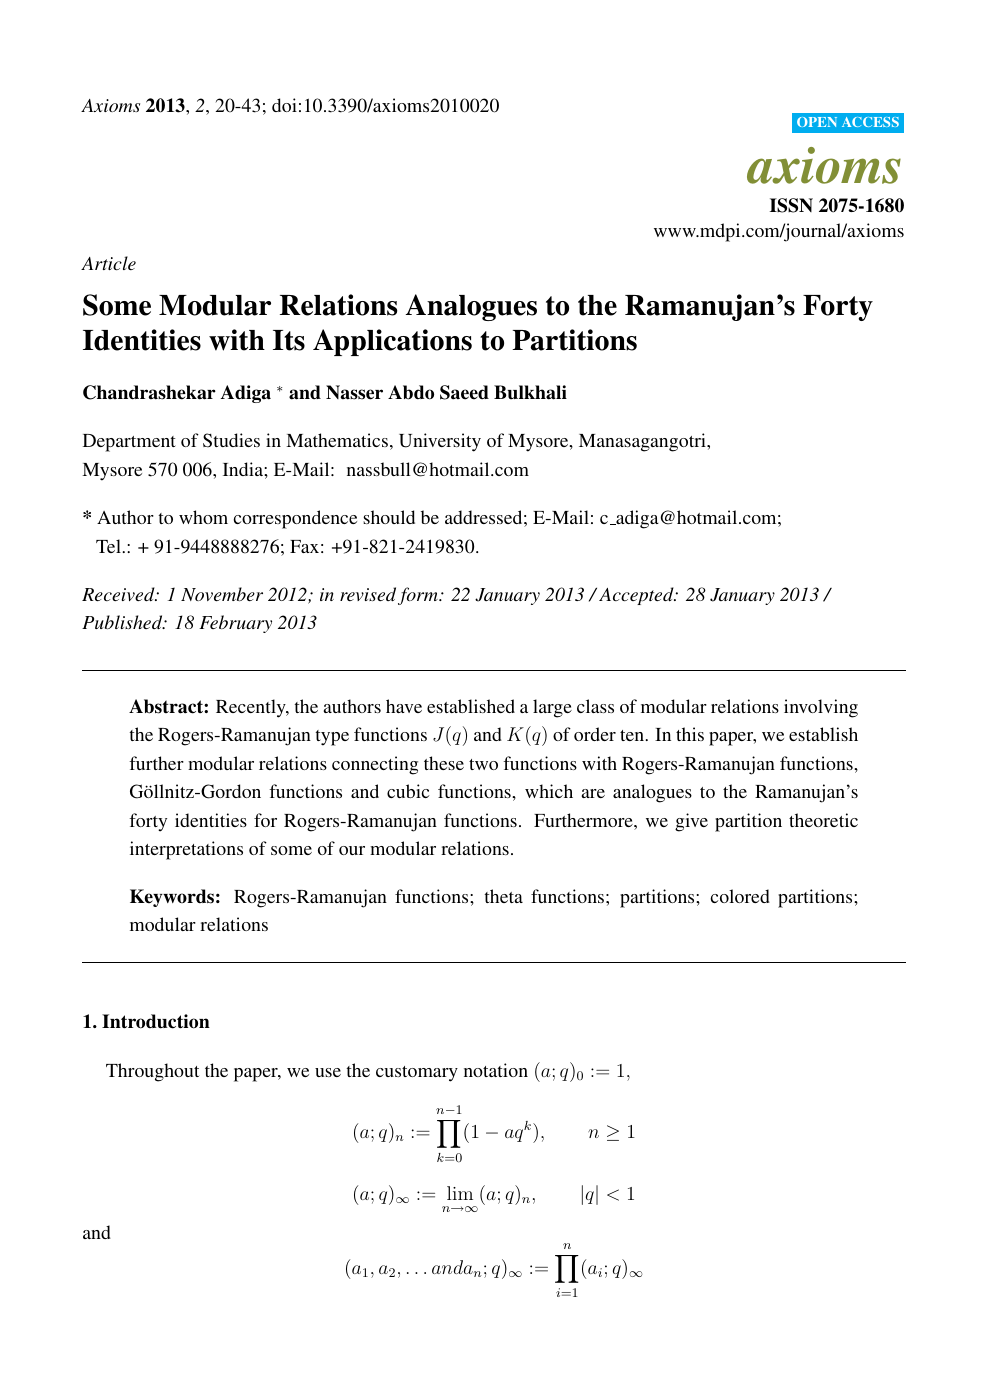 Some Modular Relations Analogues To The Ramanujan S Forty Identities With Its Applications To Partitions Topic Of Research Paper In Mathematics Download Scholarly Article Pdf And Read For Free On Cyberleninka Open